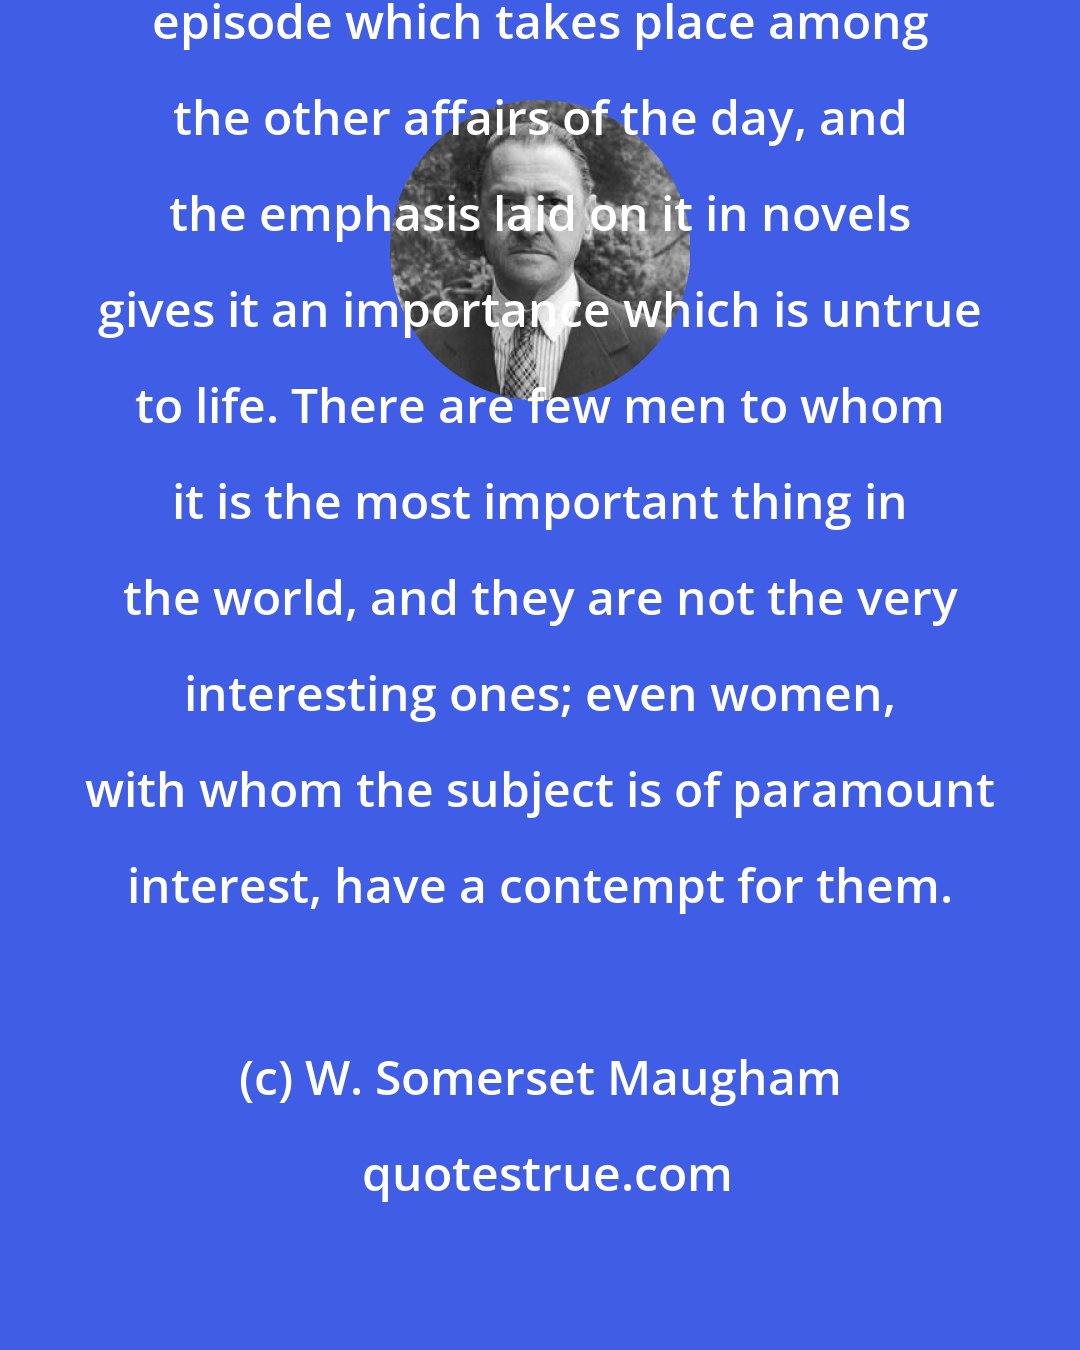 W. Somerset Maugham: For men, as a rule, love is but an episode which takes place among the other affairs of the day, and the emphasis laid on it in novels gives it an importance which is untrue to life. There are few men to whom it is the most important thing in the world, and they are not the very interesting ones; even women, with whom the subject is of paramount interest, have a contempt for them.